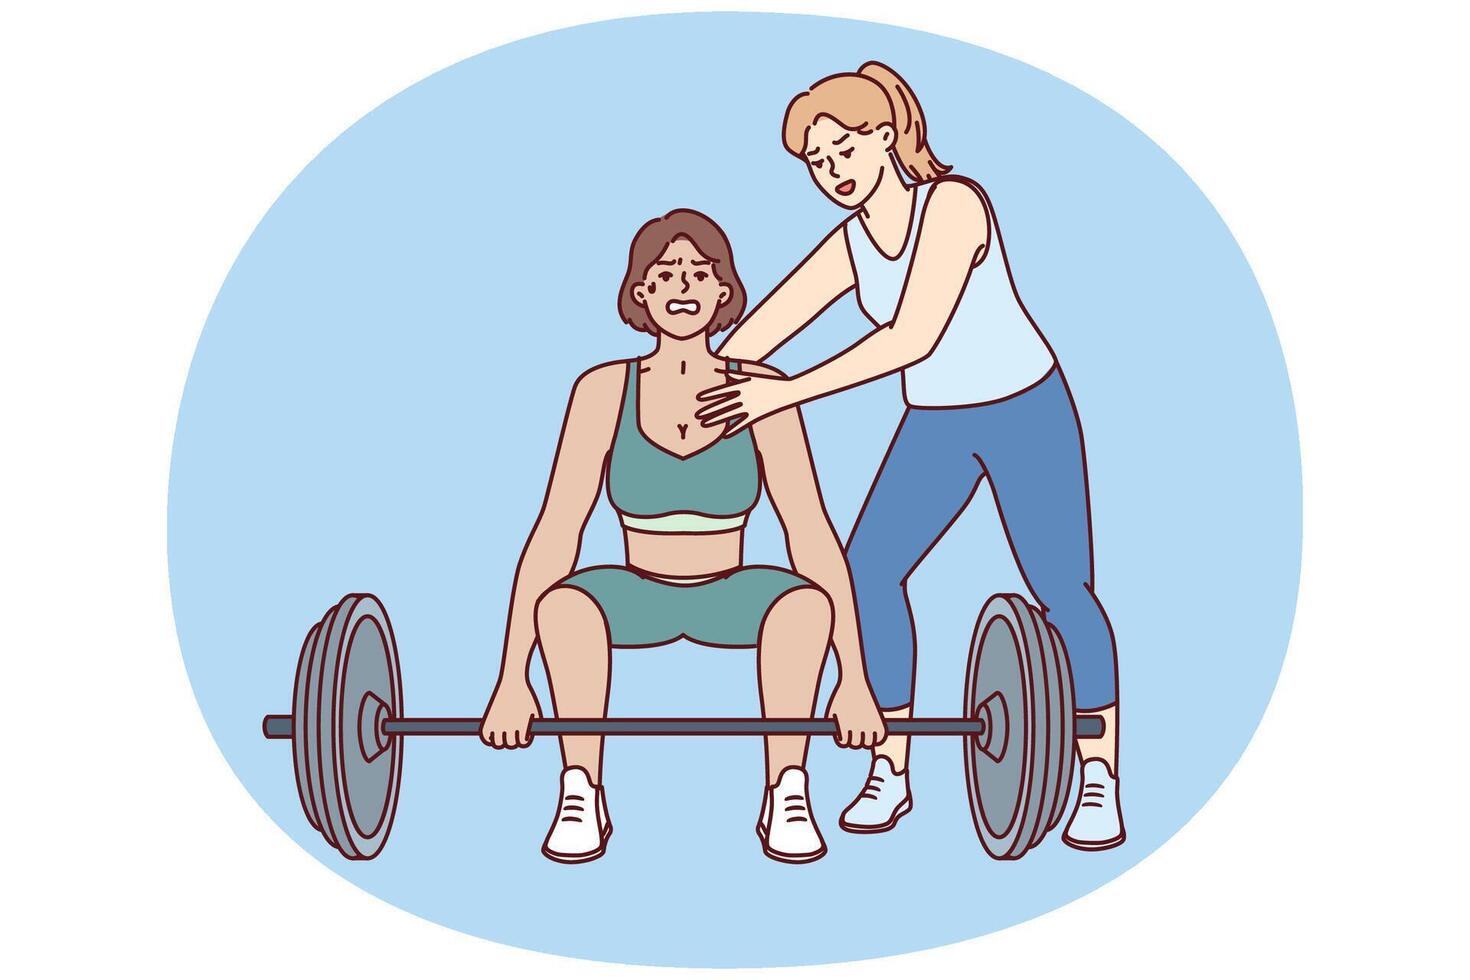 Strong athlete lifts heavy barbell under supervision of personal trainer from gym teaching ward vector